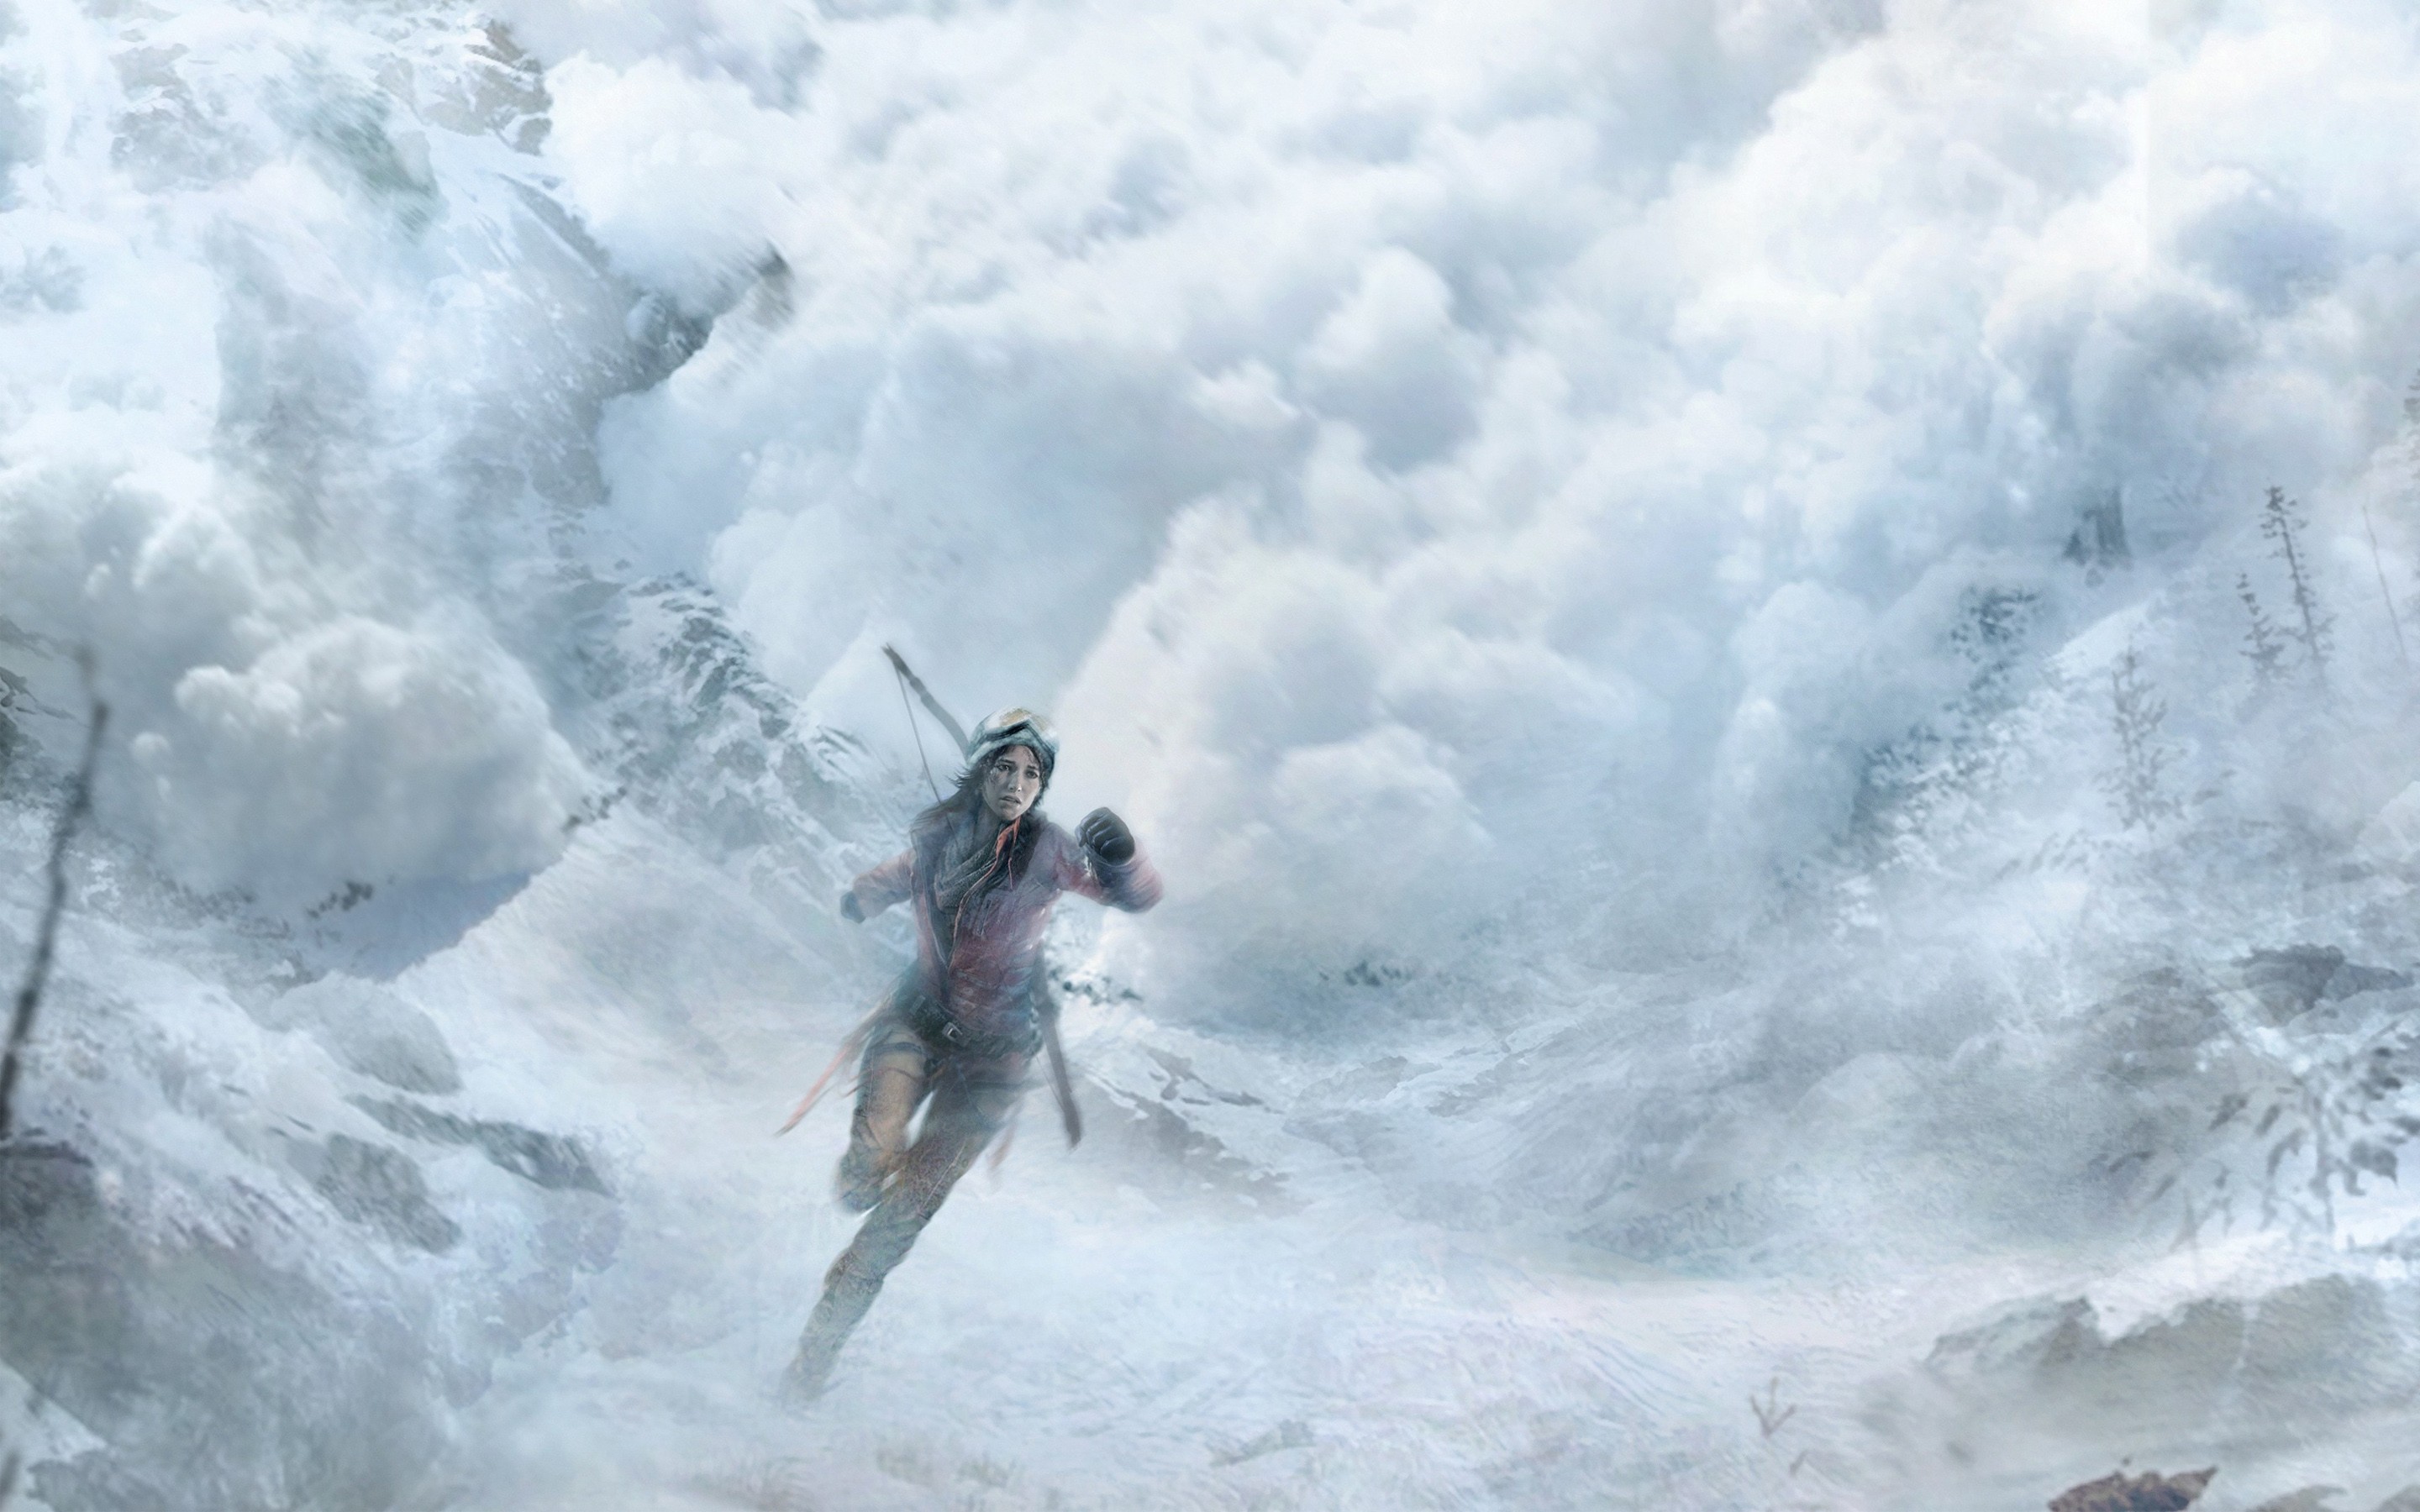 General 2880x1800 video games artwork Rise of the Tomb Raider Tomb Raider video game girls PC gaming Lara Croft (Tomb Raider) avalanche video game landscape ice snow winter running video game characters